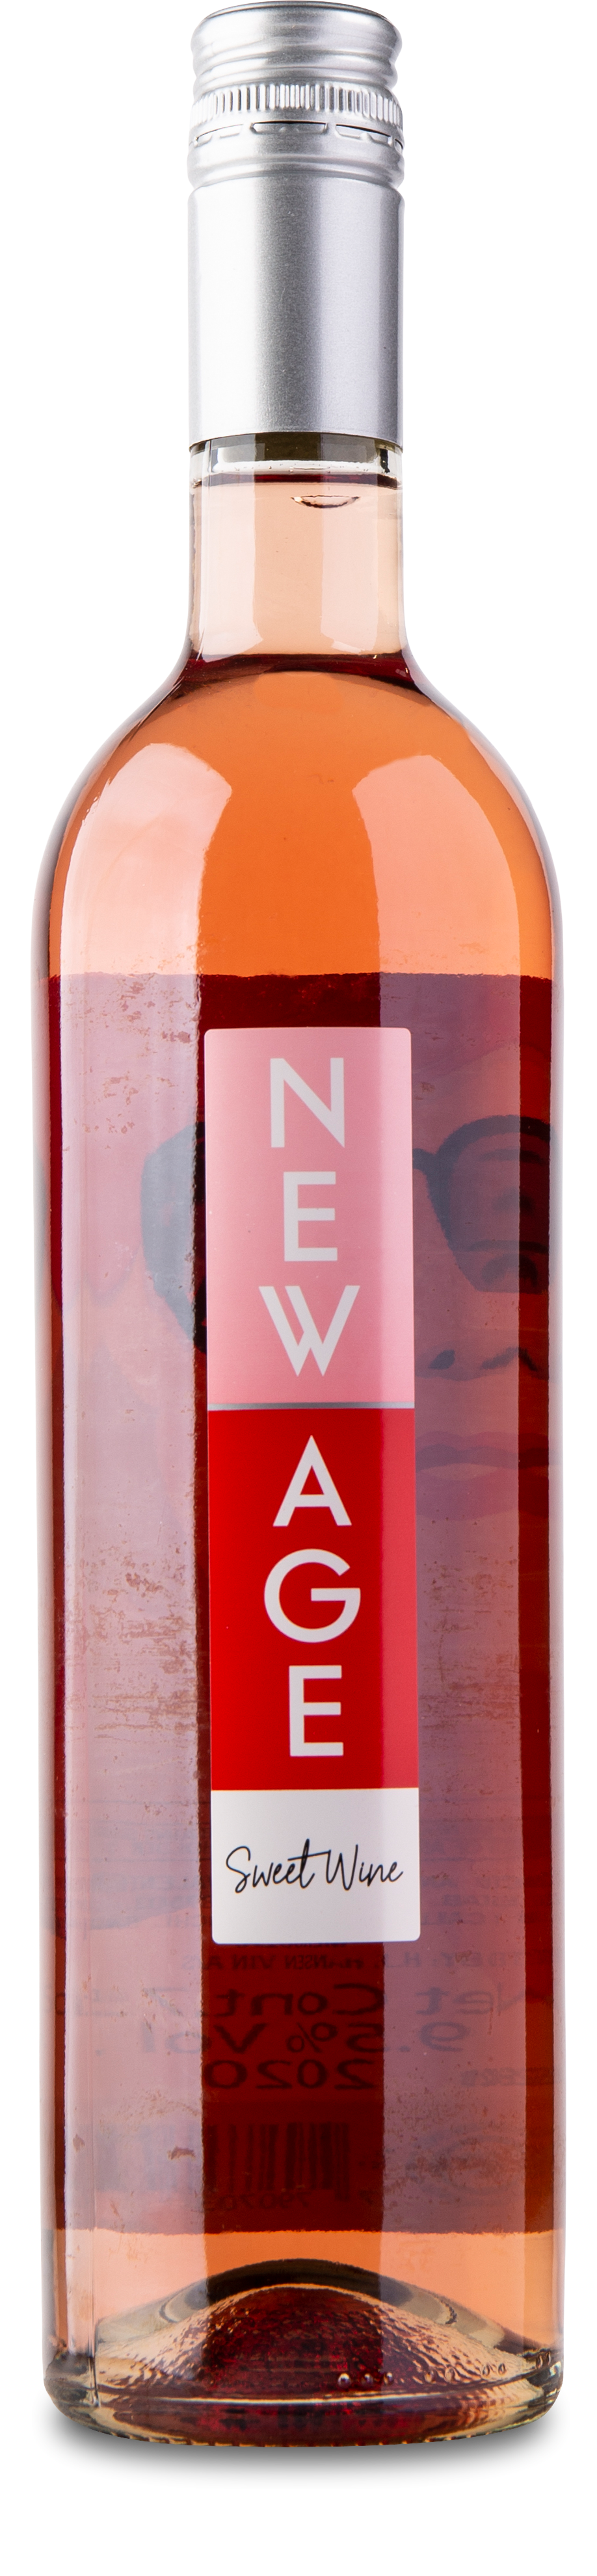 New Age Rose Valentin Bianchi 10 % 75 cl